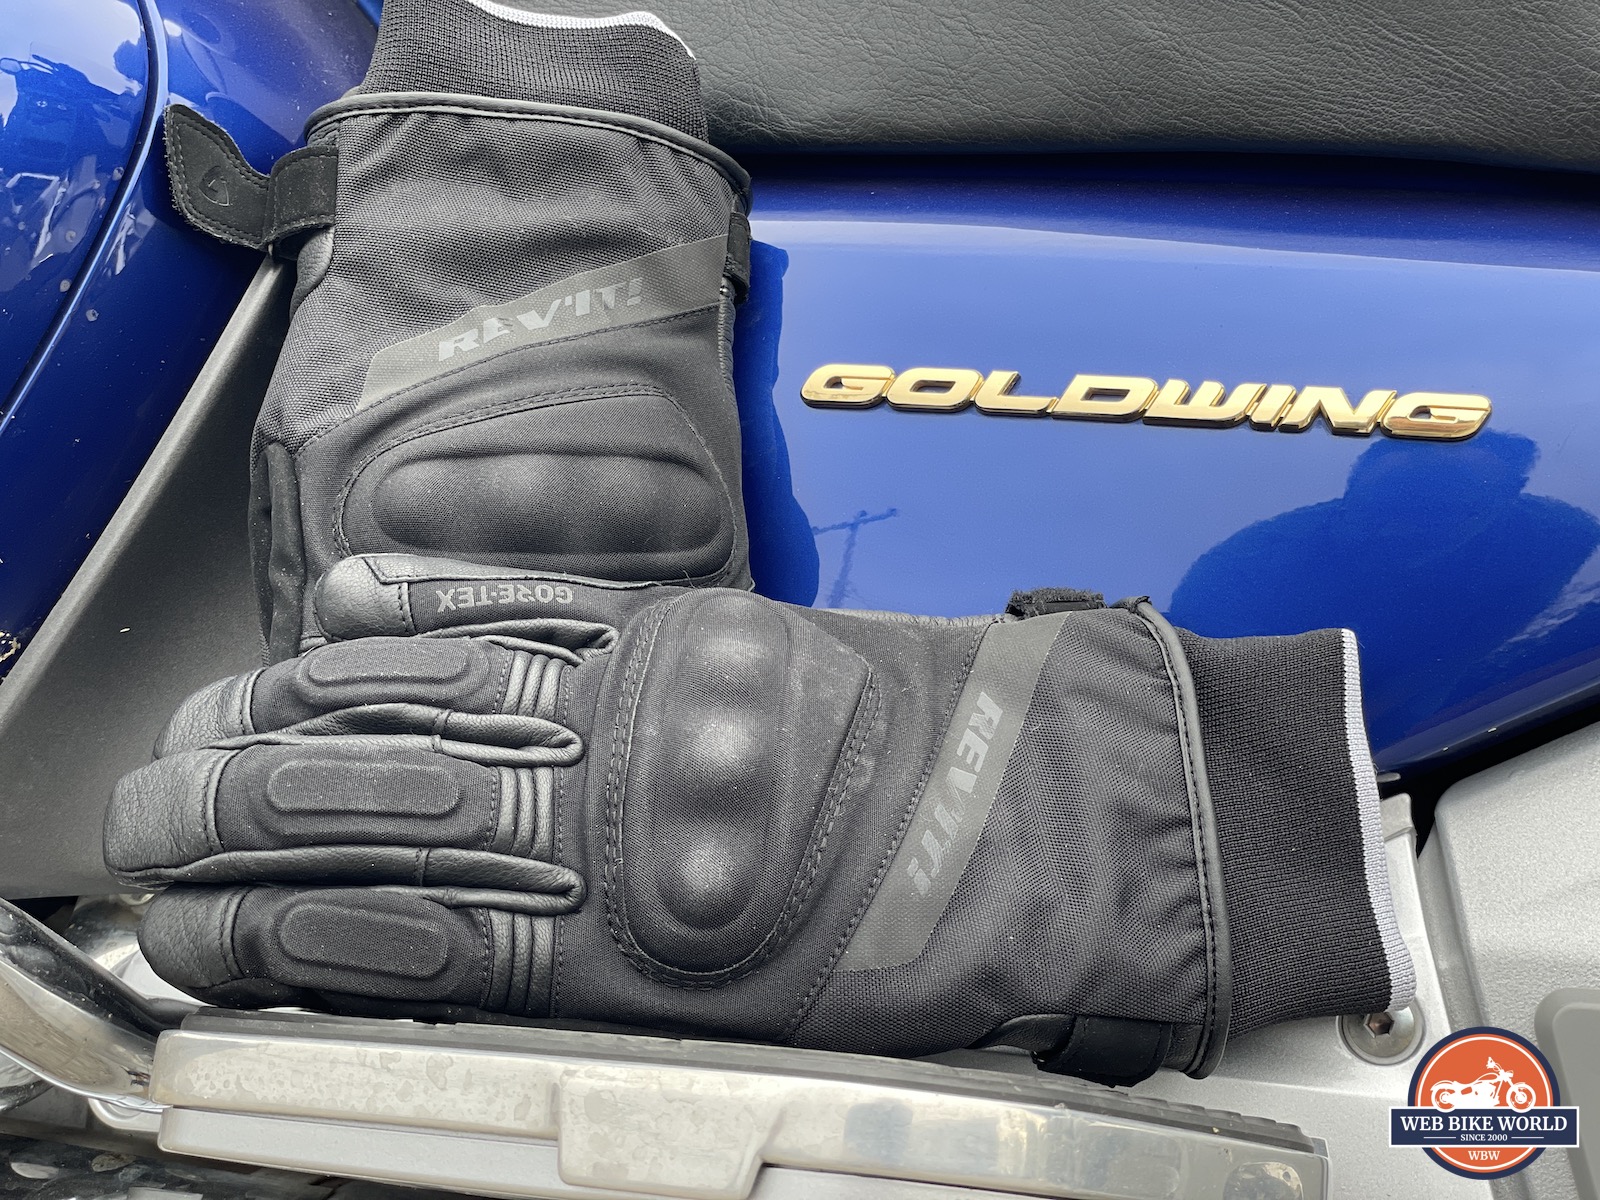 A view of the Rev'it Kryptonite 2 GTX Gloves against a 2001 Honda Goldwing